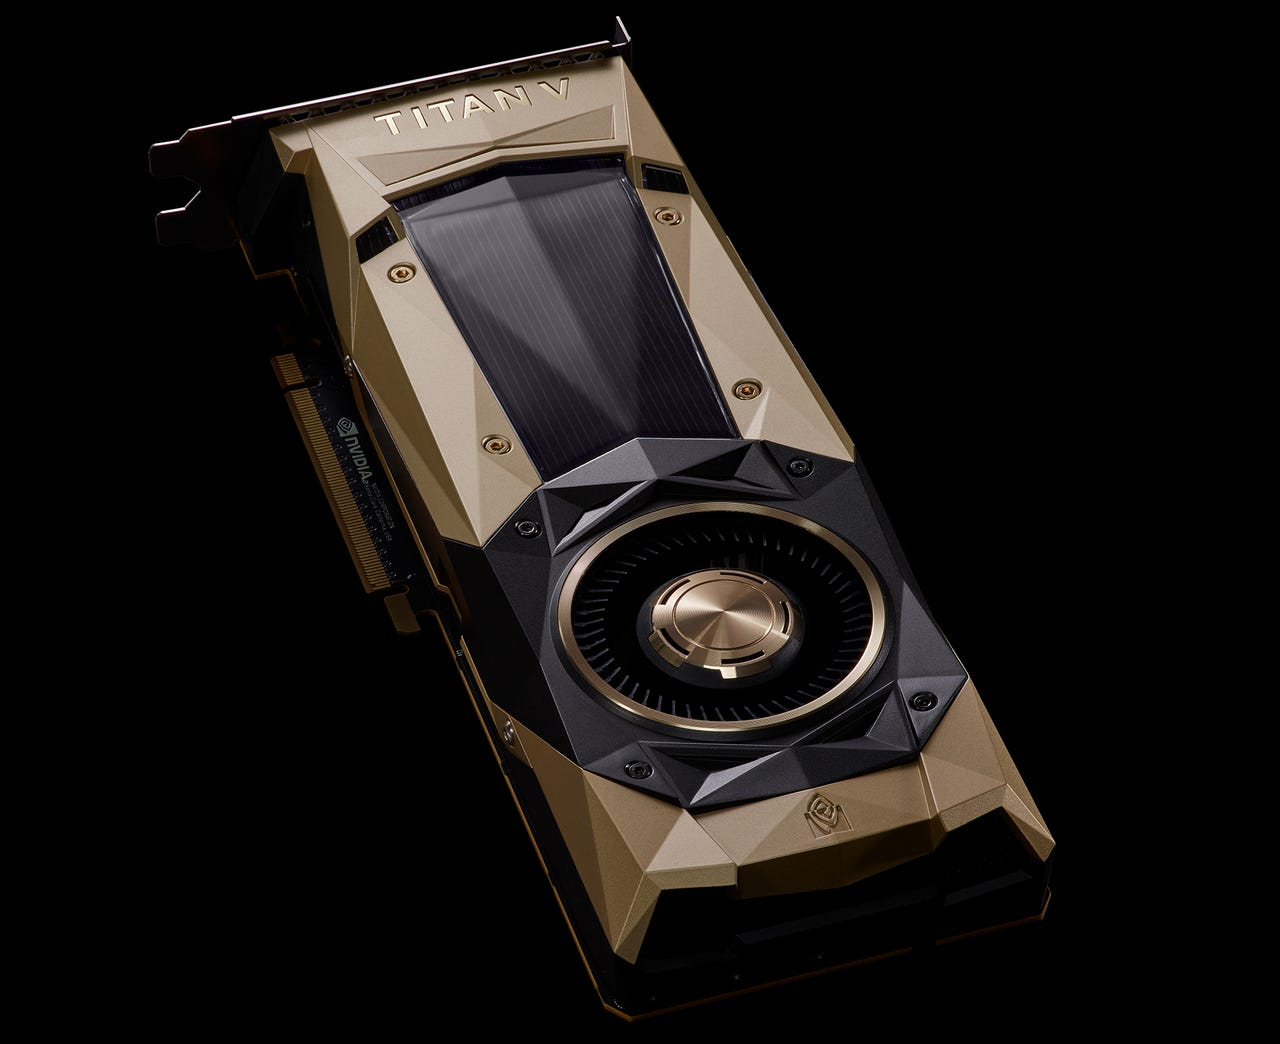 pistol Formode Underskrift Nvidia's Titan V giant: $3,000 buys you 'most powerful PC GPU ever' | ZDNET